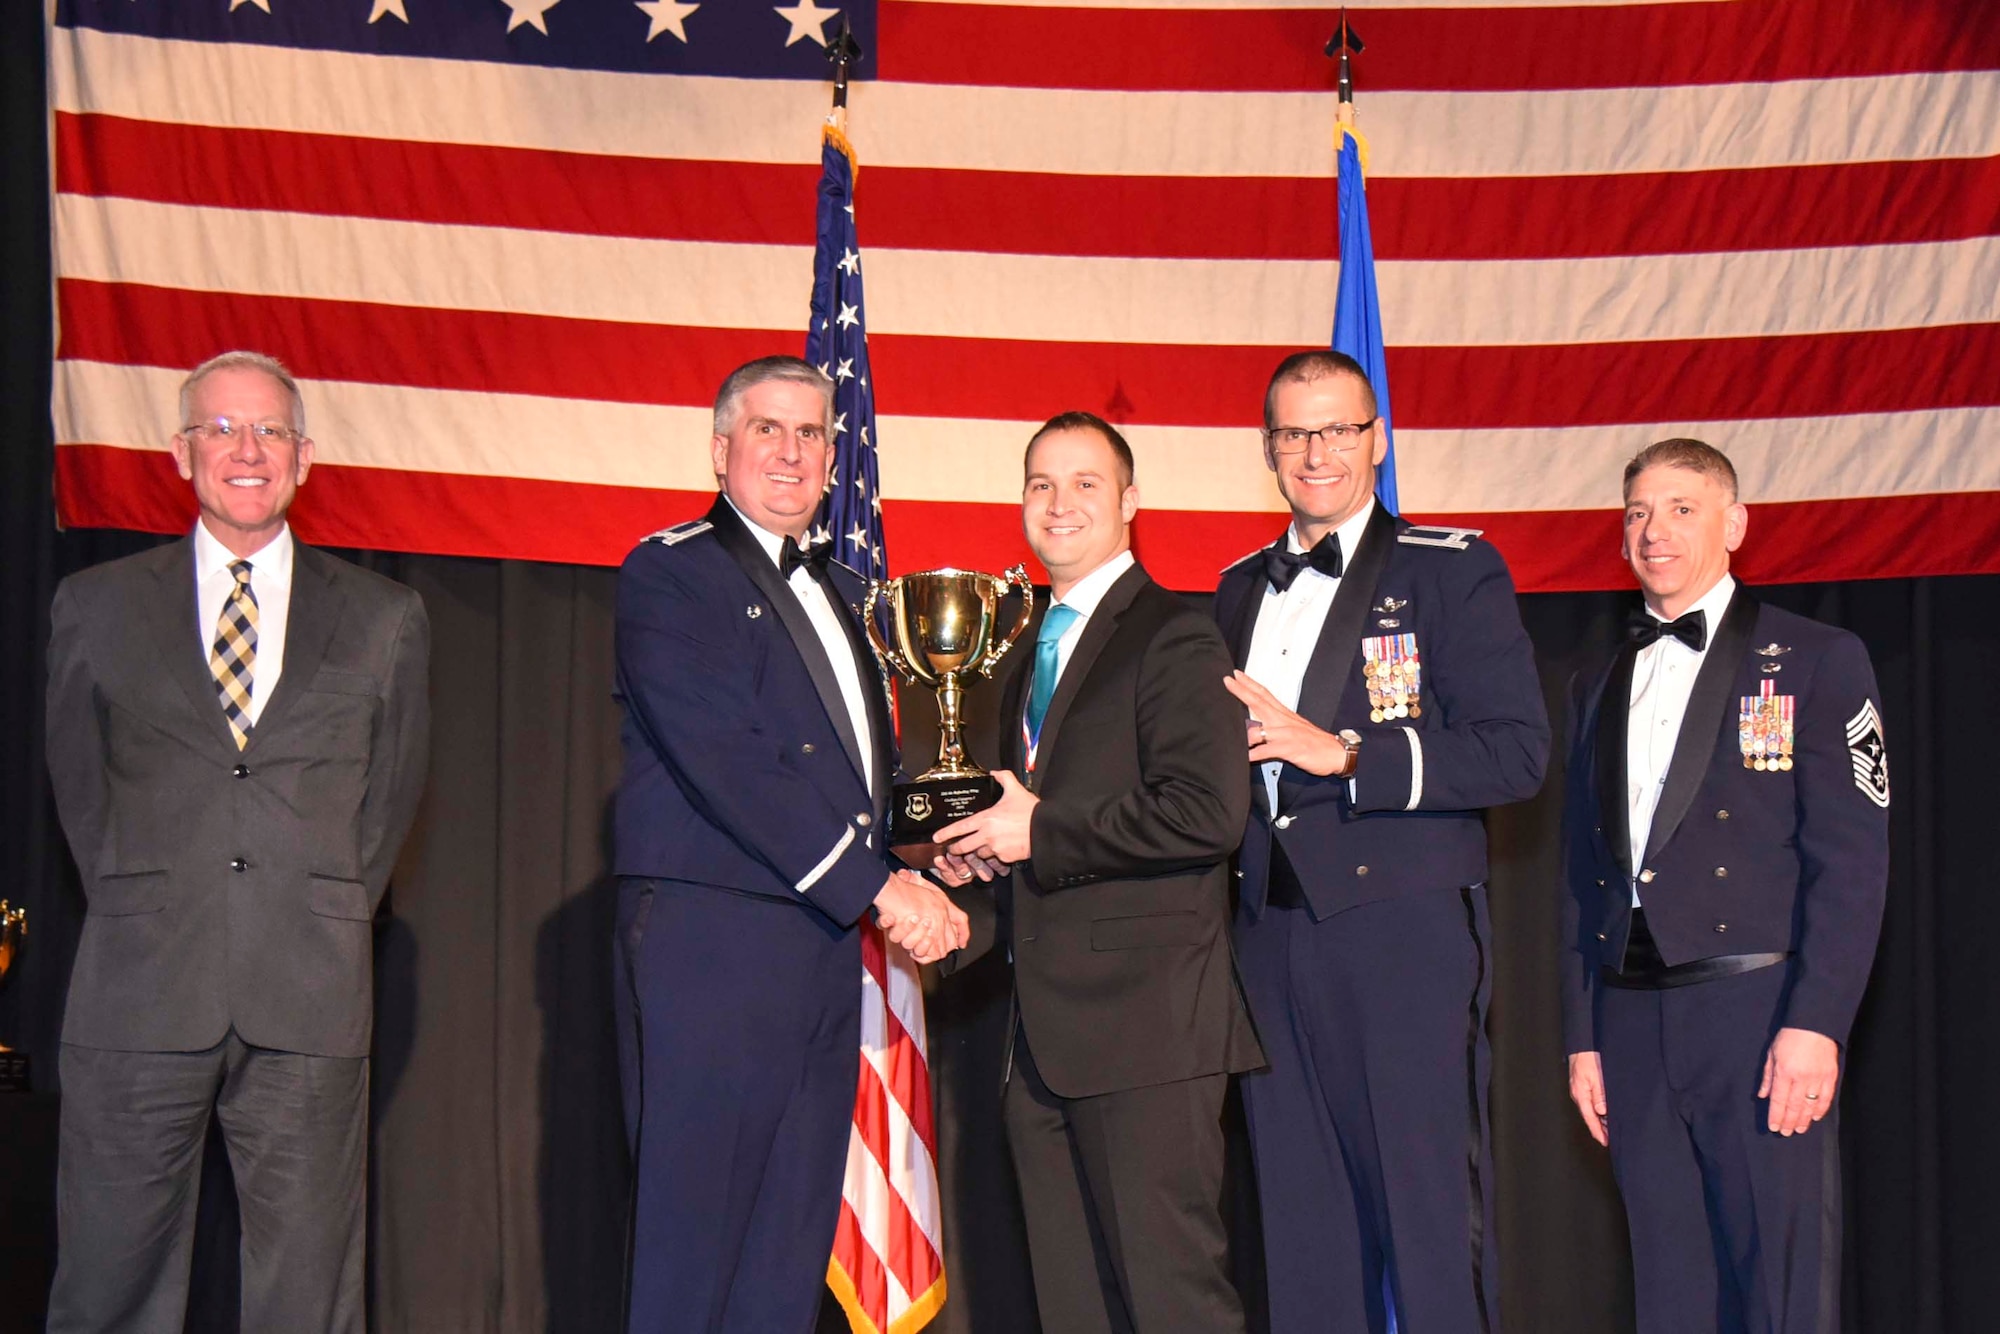 Ryan H. Lee, 22nd Security Forces Squadron, center, accepts the 2016 Civilian Category I of the Year award, Feb. 3, 2017, at McConnell Air Force Base, Kan. The annual awards ceremony recognized military and civilian members who excel in their areas of responsibilities, leadership qualities, community involvement, self-improvement and innovation from of January to December 2016. (U.S. Air Force photo/Senior Airman Christopher Thornbury)